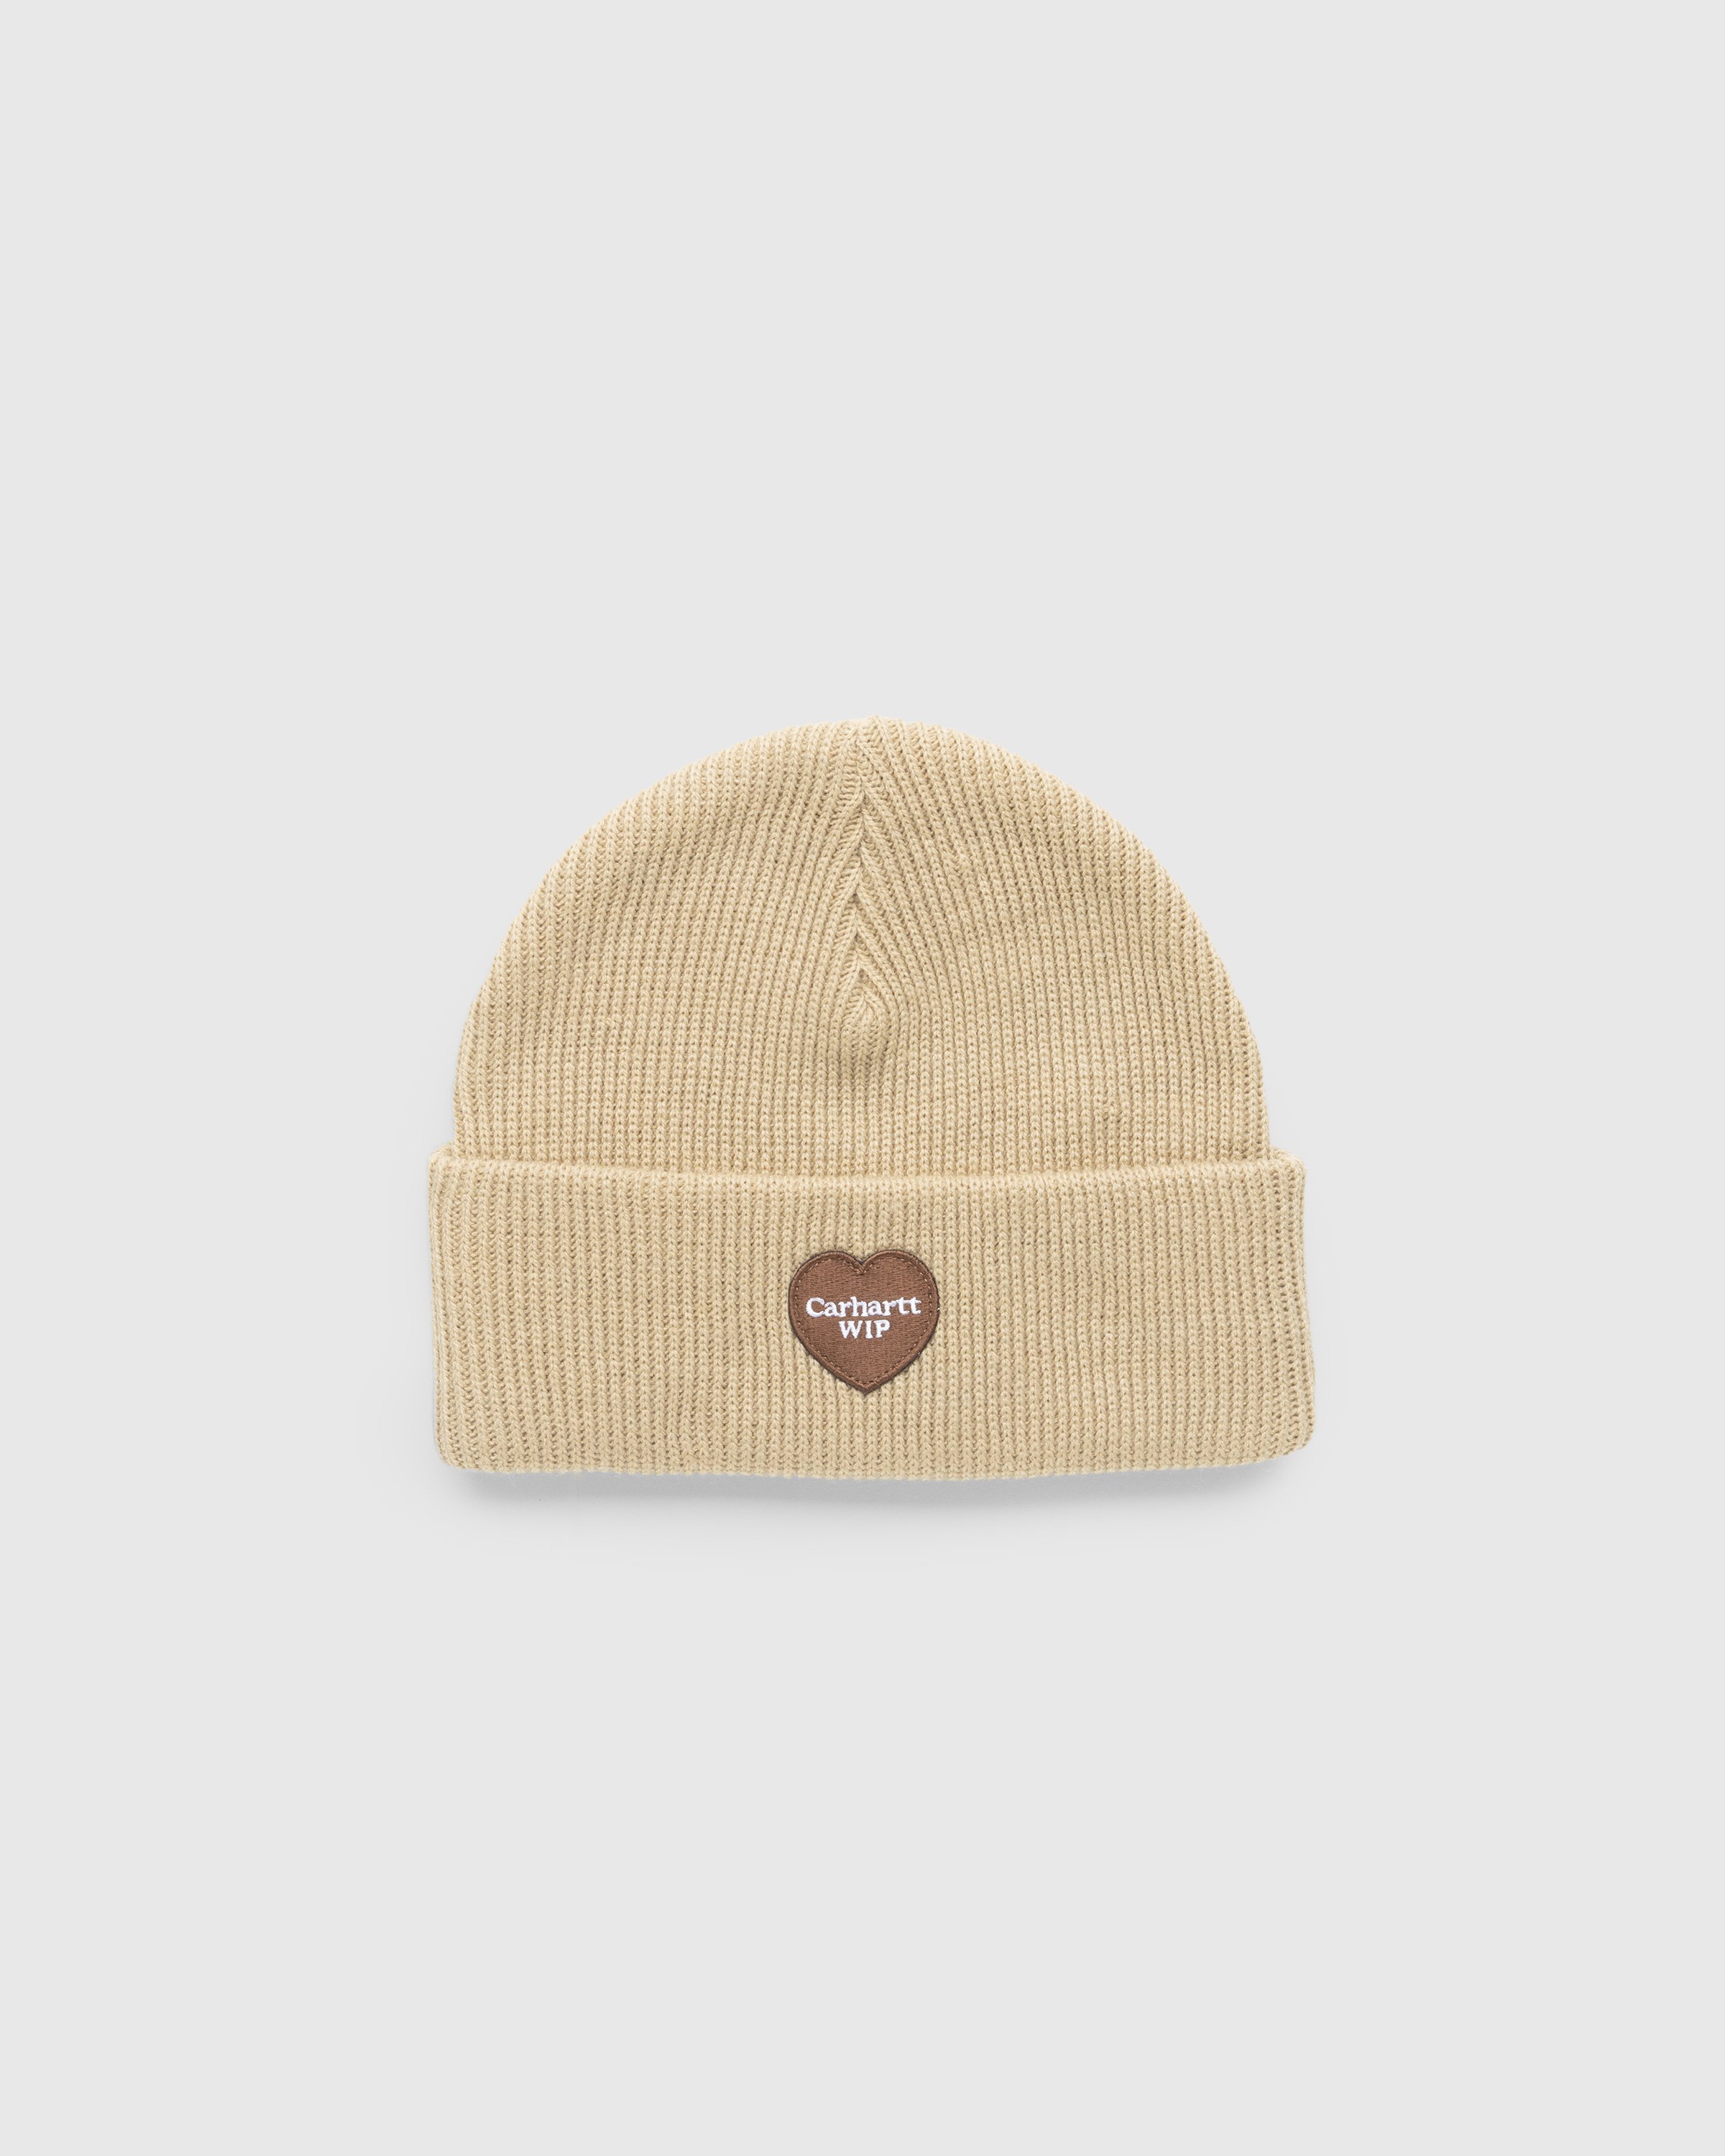 Carhartt WIP - Heart Patch Beanie Brown - Accessories - Brown - Image 1